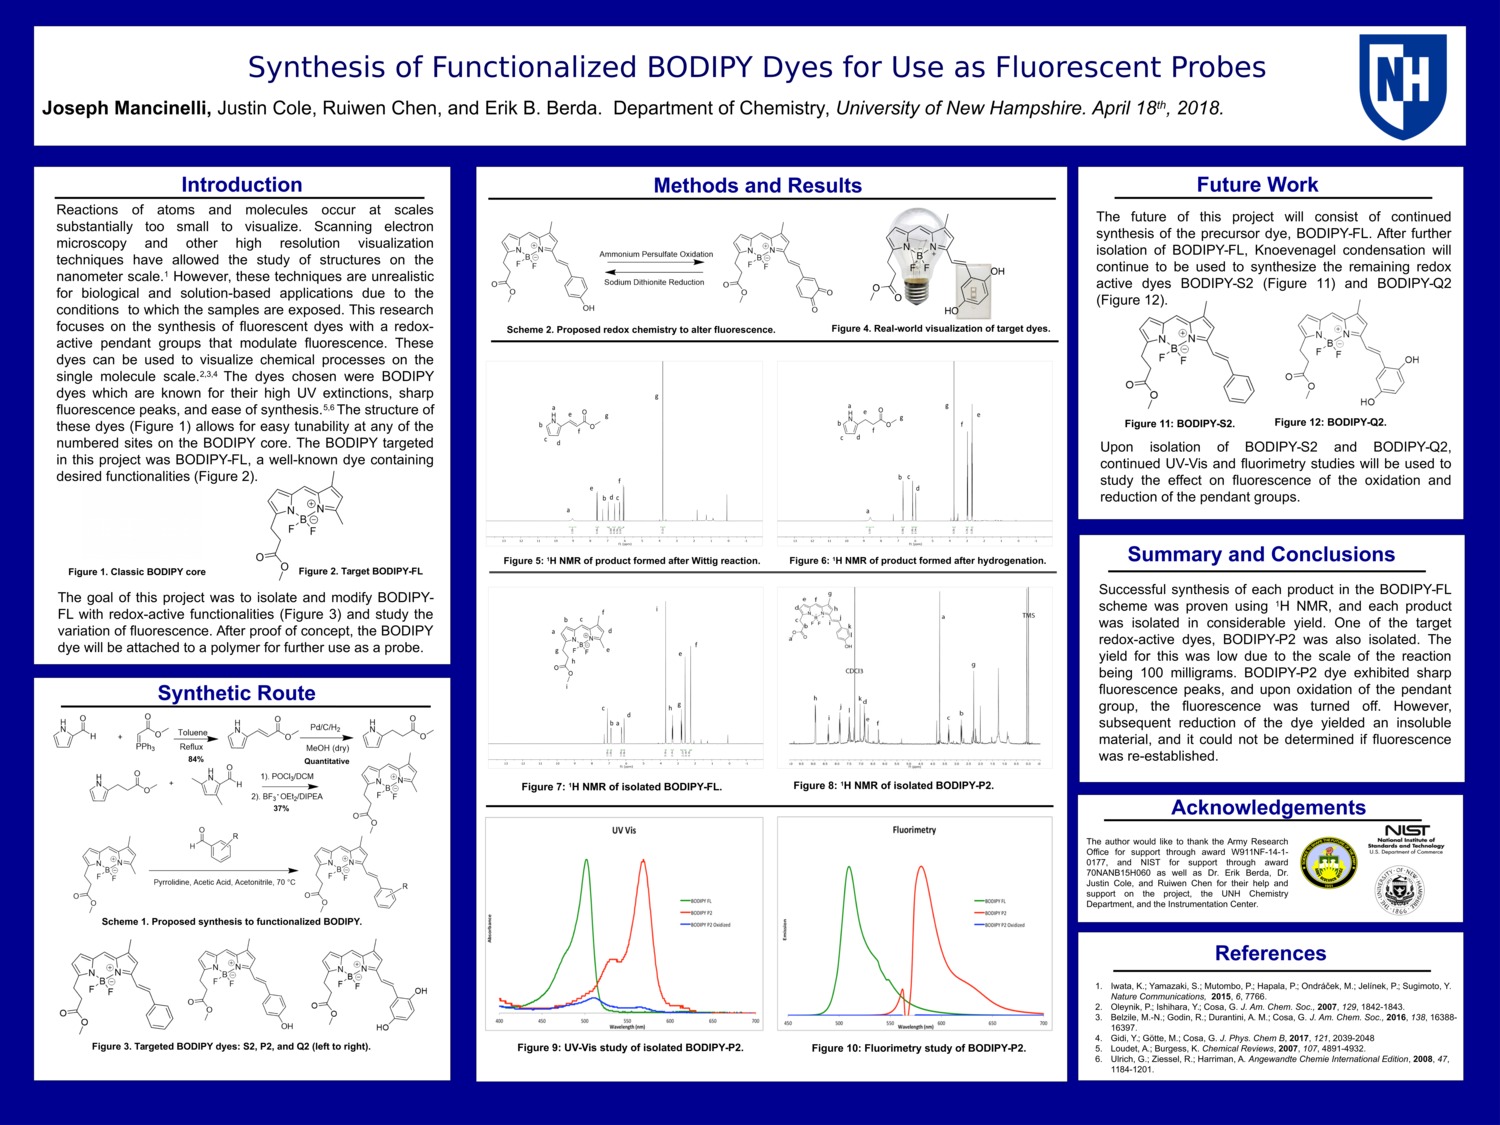 Synthesis Of Functionalized Bodipy Dyes For Use As Fluorescent Probes by jpm2006